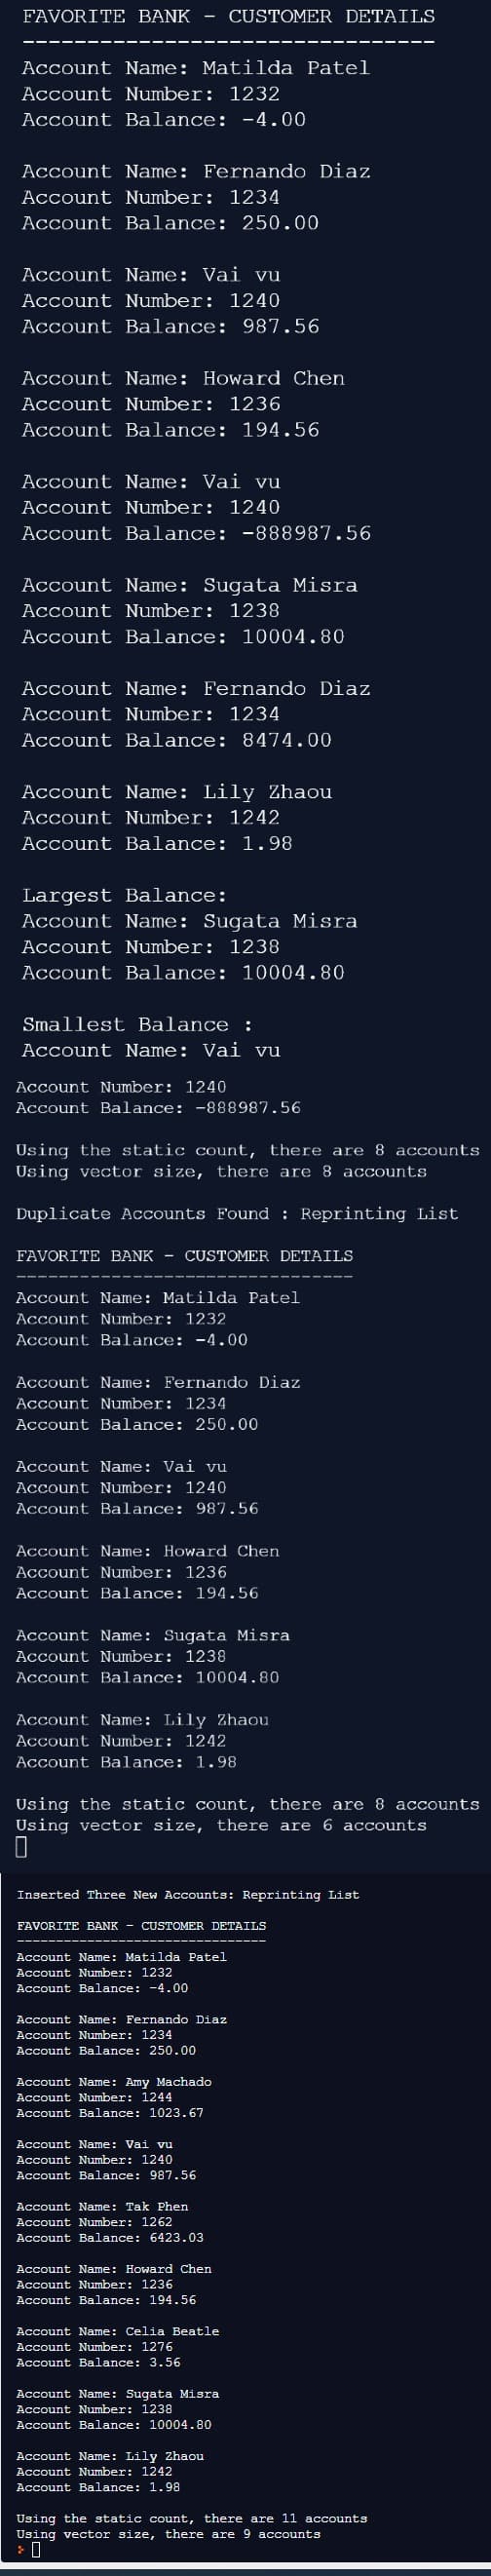 FAVORITE BANK
-
Account Name: Matilda Patel
Account Number: 1232
Account Balance: -4.00
Account Name: Fernando Diaz
Account Number: 1234
Account Balance: 250.00
Account Name: Vai vu
Account Number: 1240
Account Balance: 987.56
Account Name: Howard Chen
Account Number: 1236
Account Balance: 194.56
CUSTOMER DETAILS
Account Name: Vai vu
Account Number: 1240
Account Balance: -888987.56
Account Name: Sugata Misra
Account Number: 1238
Account Balance: 10004.80
Account Name: Fernando Diaz
Account Number: 1234
Account Balance: 8474.00
Account Name: Lily Zhaou
Account Number: 1242
Account Balance: 1.98
Largest Balance:
Account Name: Sugata Misra
Account Number: 1238
Account Balance: 10004.80
Smallest Balance :
Account Name: Vai vu
Account Number: 1240
Account Balance: -888987.56
Using the static count, there are 8 accounts
Using vector size, there are 8 accounts
Duplicate Accounts Found: Reprinting List
FAVORITE BANK - CUSTOMER DETAILS
Account Name: Matilda Patel
Account Number: 1232
Account Balance: -4.00
Account Name: Fernando Diaz
Account Number: 1234
Account Balance: 250.00
Account Name: Vai vu
Account Number: 1240
Account Balance: 987.56
Account Name: Howard Chen
Account Number: 1236
Account Balance: 194.56
Account Name: Sugata Misra
Account Number: 1238
Account Balance: 10004.80
Account Name: Lily Zhaou
Account Number: 1242
Account Balance: 1.98
Using the static count, there are 8 accounts
Using vector size, there are 6 accounts
0
Inserted Three New Accounts: Reprinting List
FAVORITE BANK - CUSTOMER DETAILS
Account Name: Matilda Patel
Account Number: 1232
Account Balance: -4.00
Account Name: Fernando Diaz
Account Number: 1234
Account Balance: 250.00
Account Name: Amy Machado
Account Number: 1244
Account Balance: 1023.67
Account Name: Vai vu
Account Number: 1240
Account Balance: 987.56
Account Name: Tak Phen
Account Number: 1262
Account Balance: 6423.03
Account Name: Howard Chen
Account Number: 1236
Account Balance: 194.56
Account Name: Celia Beatle
Account Number: 1276
Account Balance: 3.56
Account Name: Sugata Misra
Account Number: 1238
Account Balance: 10004.80
Account Name: Lily Zhaou
Account Number: 1242
Account Balance: 1.98
Using the static count, there are 11 accounts
Using vector size, there are 9 accounts